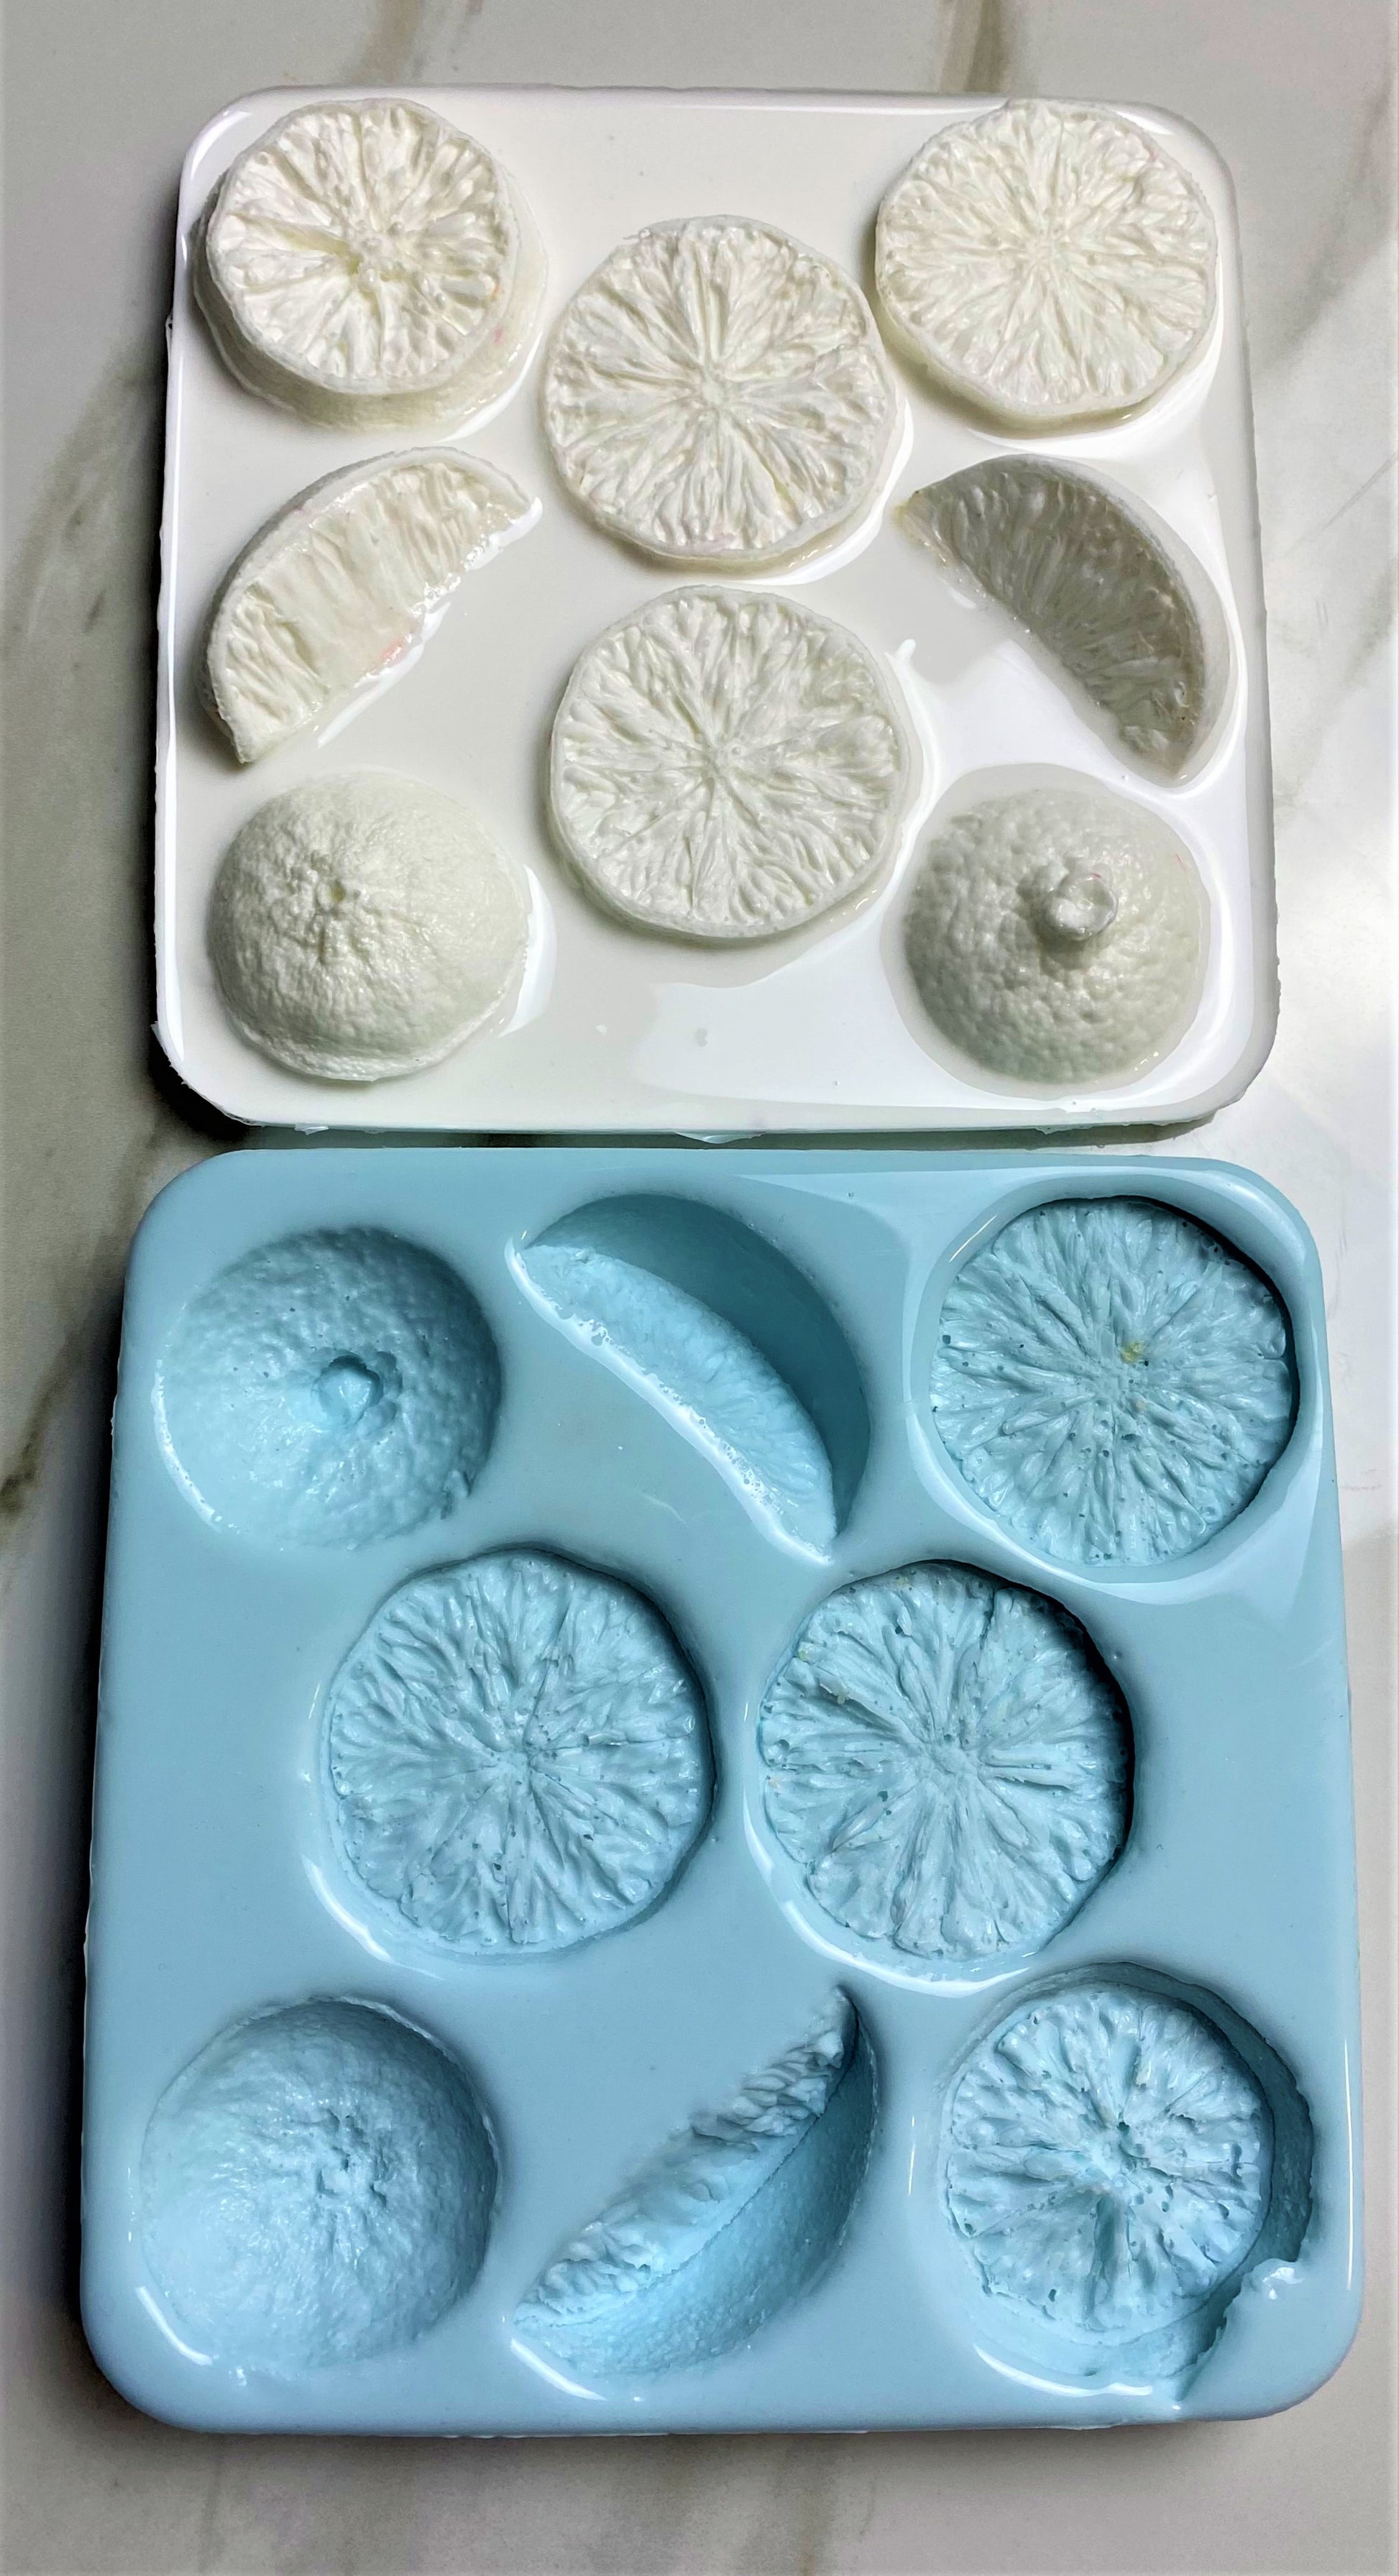 8pc Apple Slices Silicone Mold for Wax Melts, Candles